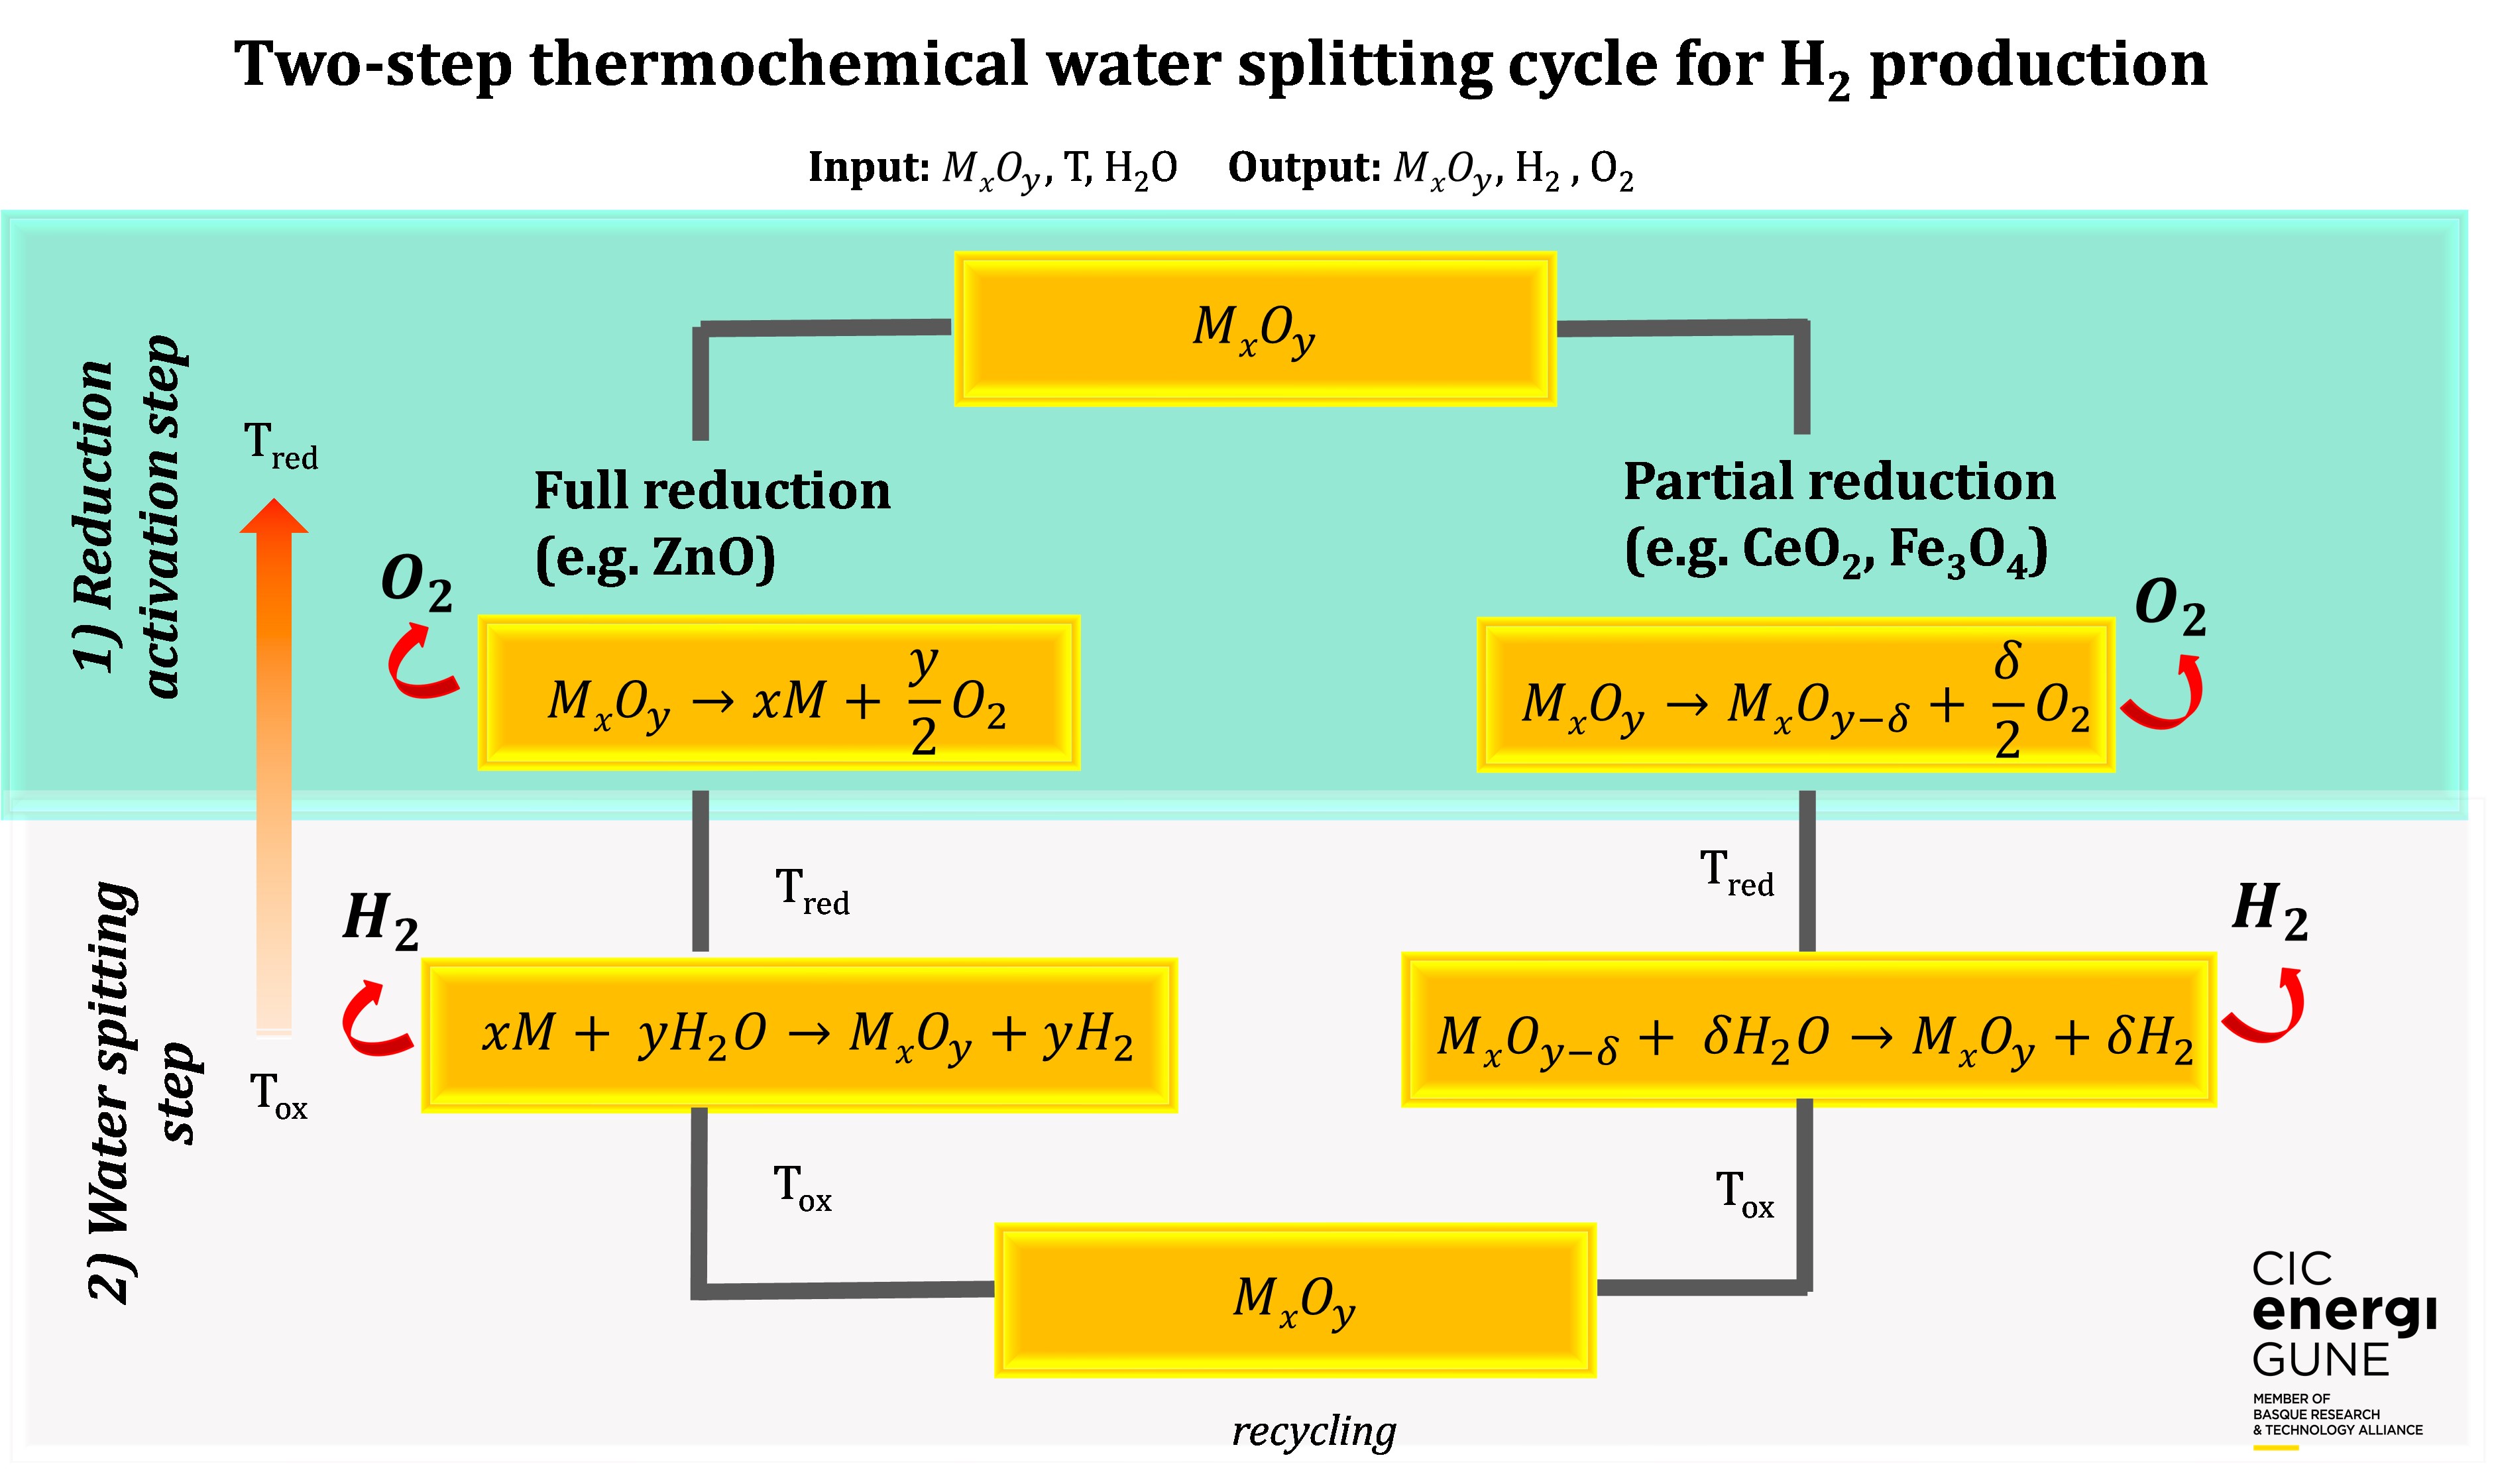 Figure 1.  Reaction pathways in two-step thermochemical water splitting for H2 production.